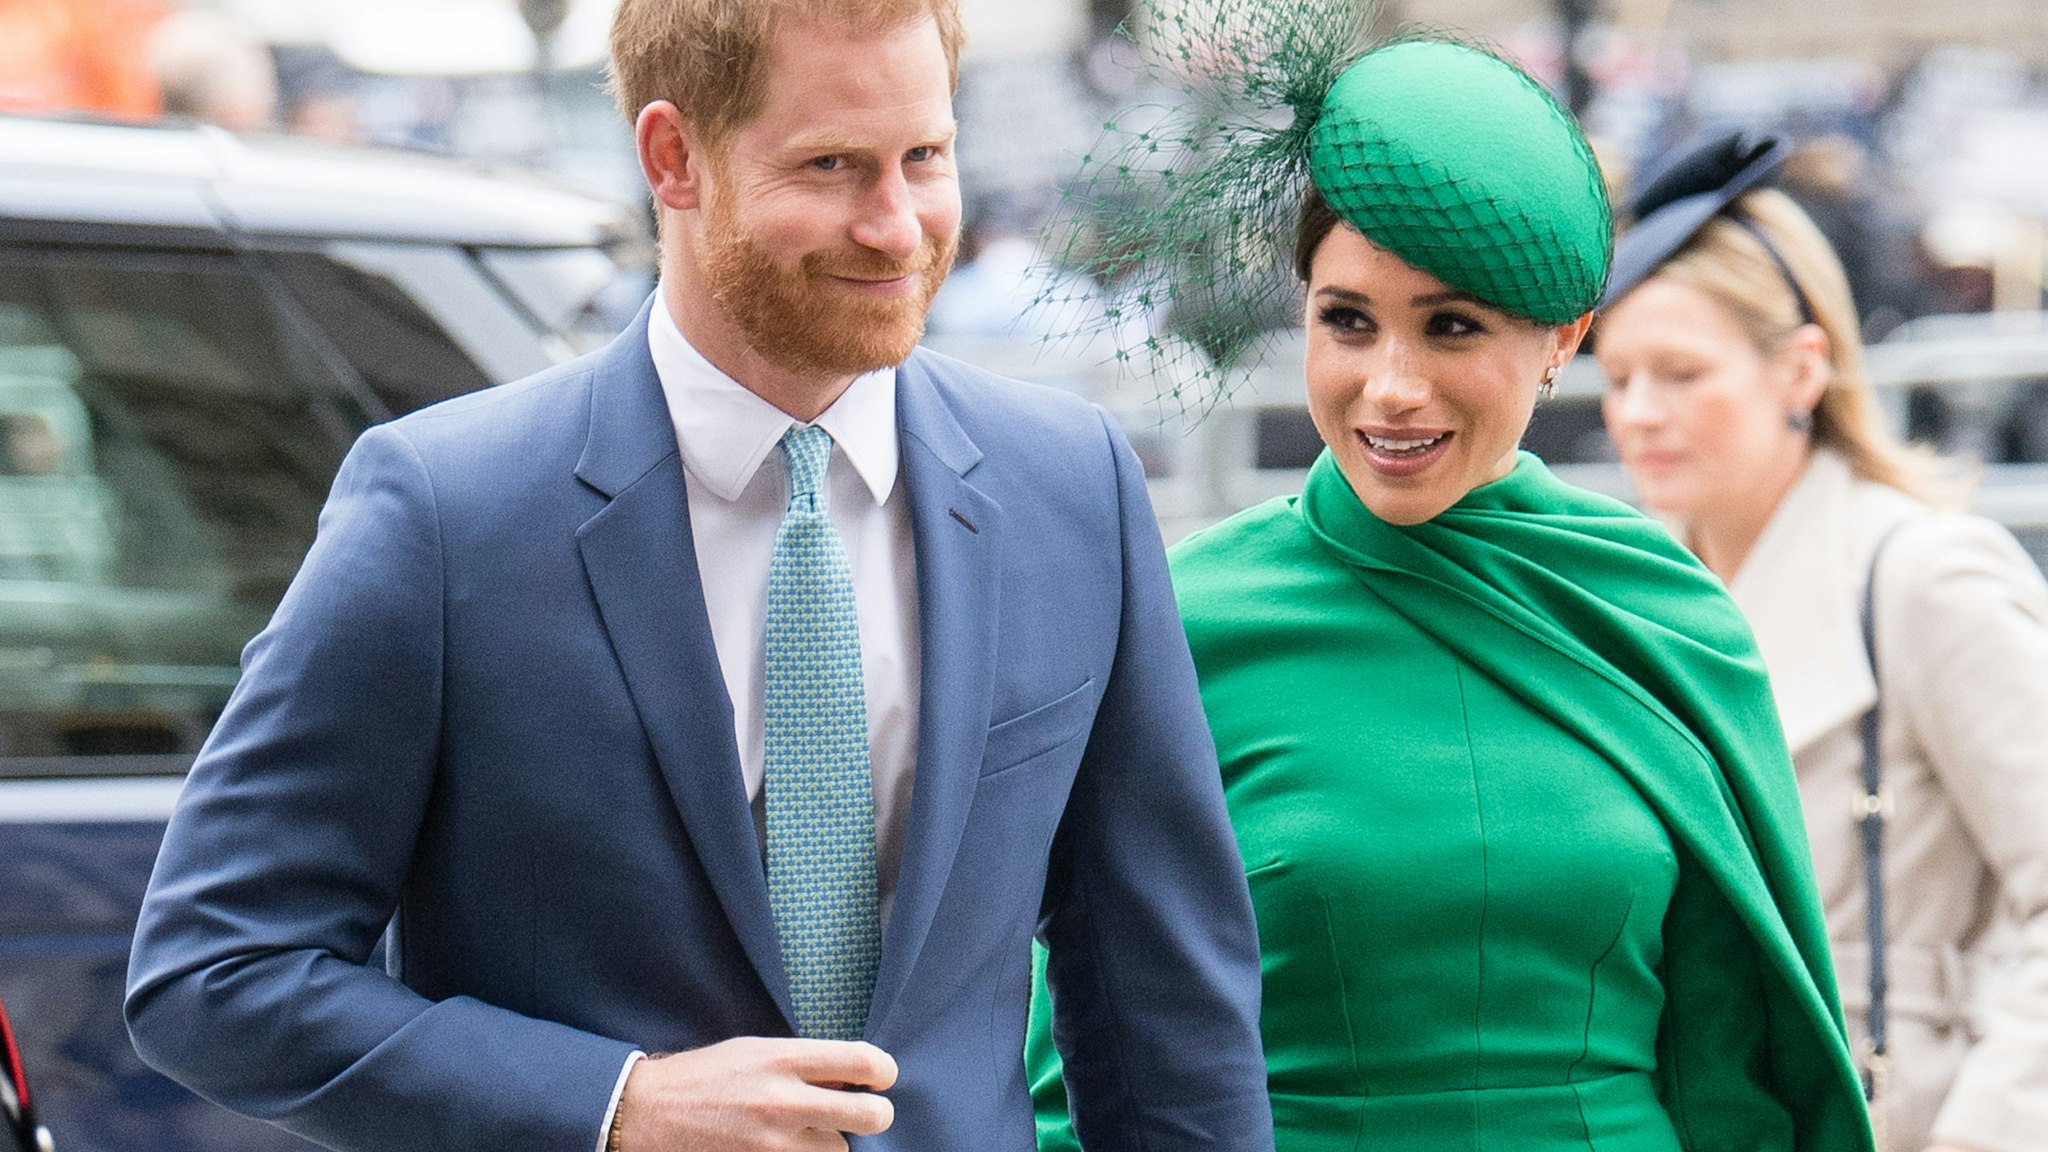 LONDON, ENGLAND - MARCH 09: Prince Harry, Duhcess of Sussex and Meghan, Duchess of Sussex attends the Commonwealth Day Service 2020 on March 09, 2020 in London, England. (Photo by Samir Hussein/WireImage)